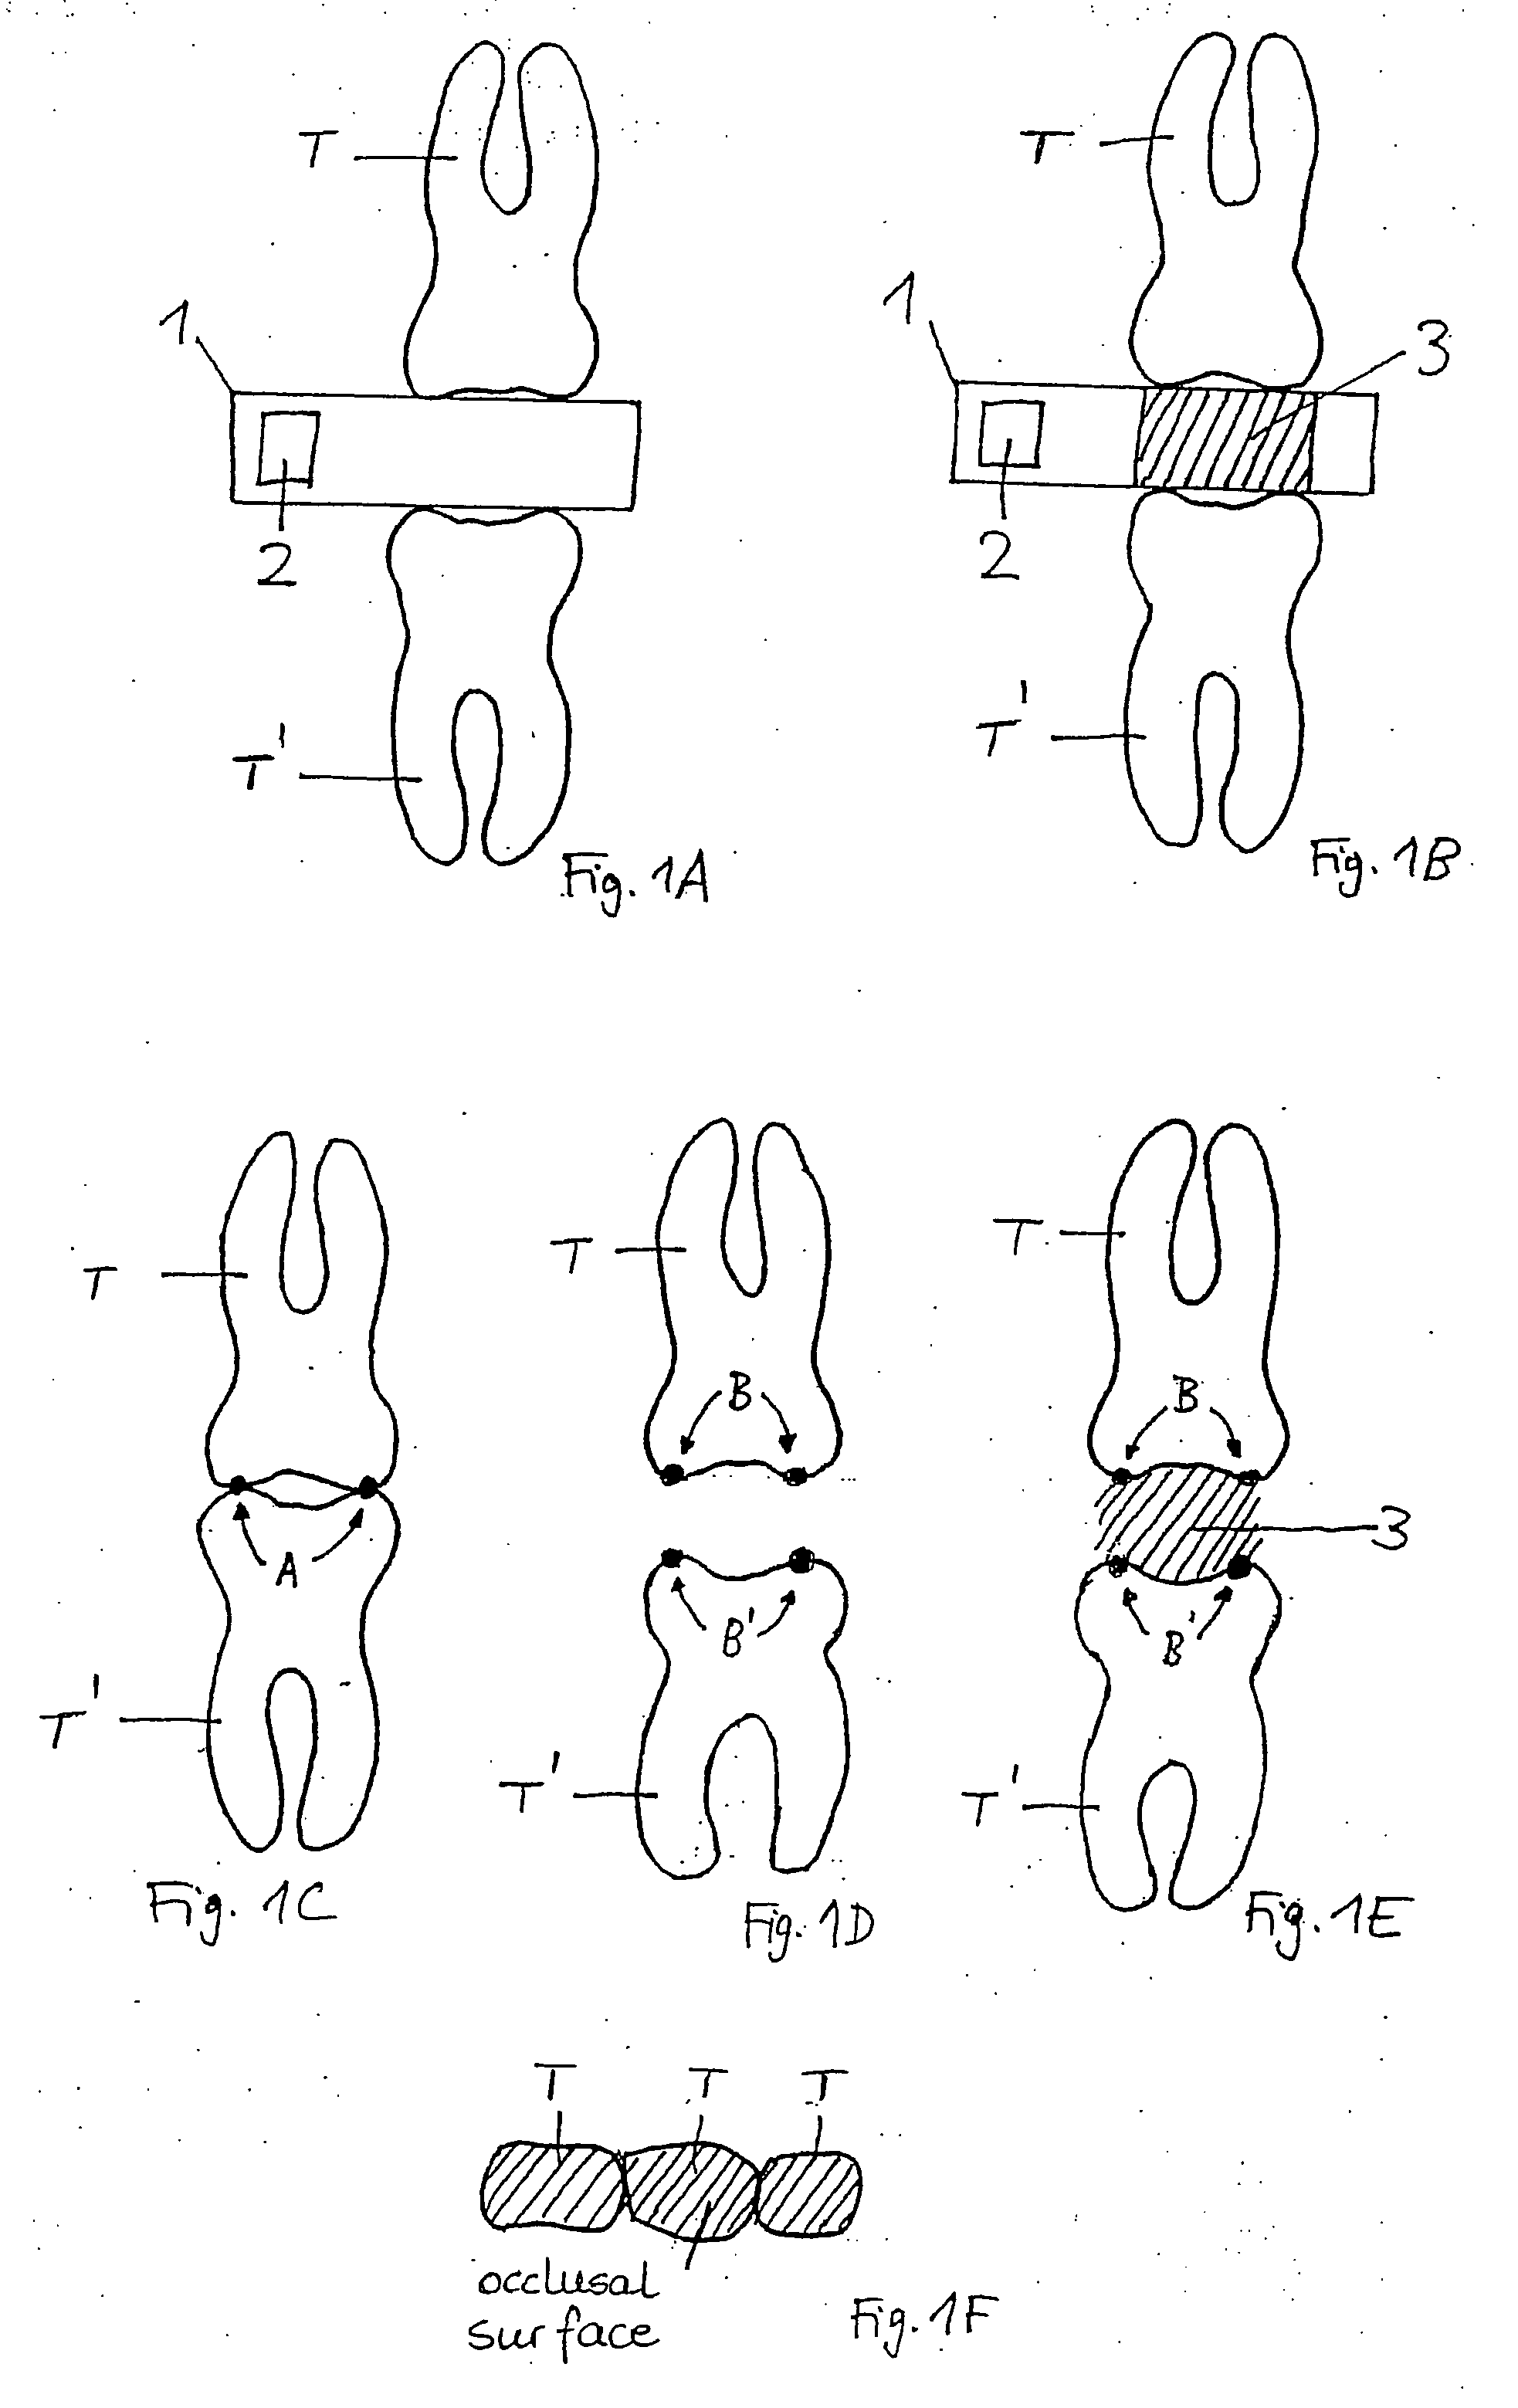 Device for indirectly measuring occlusal forces